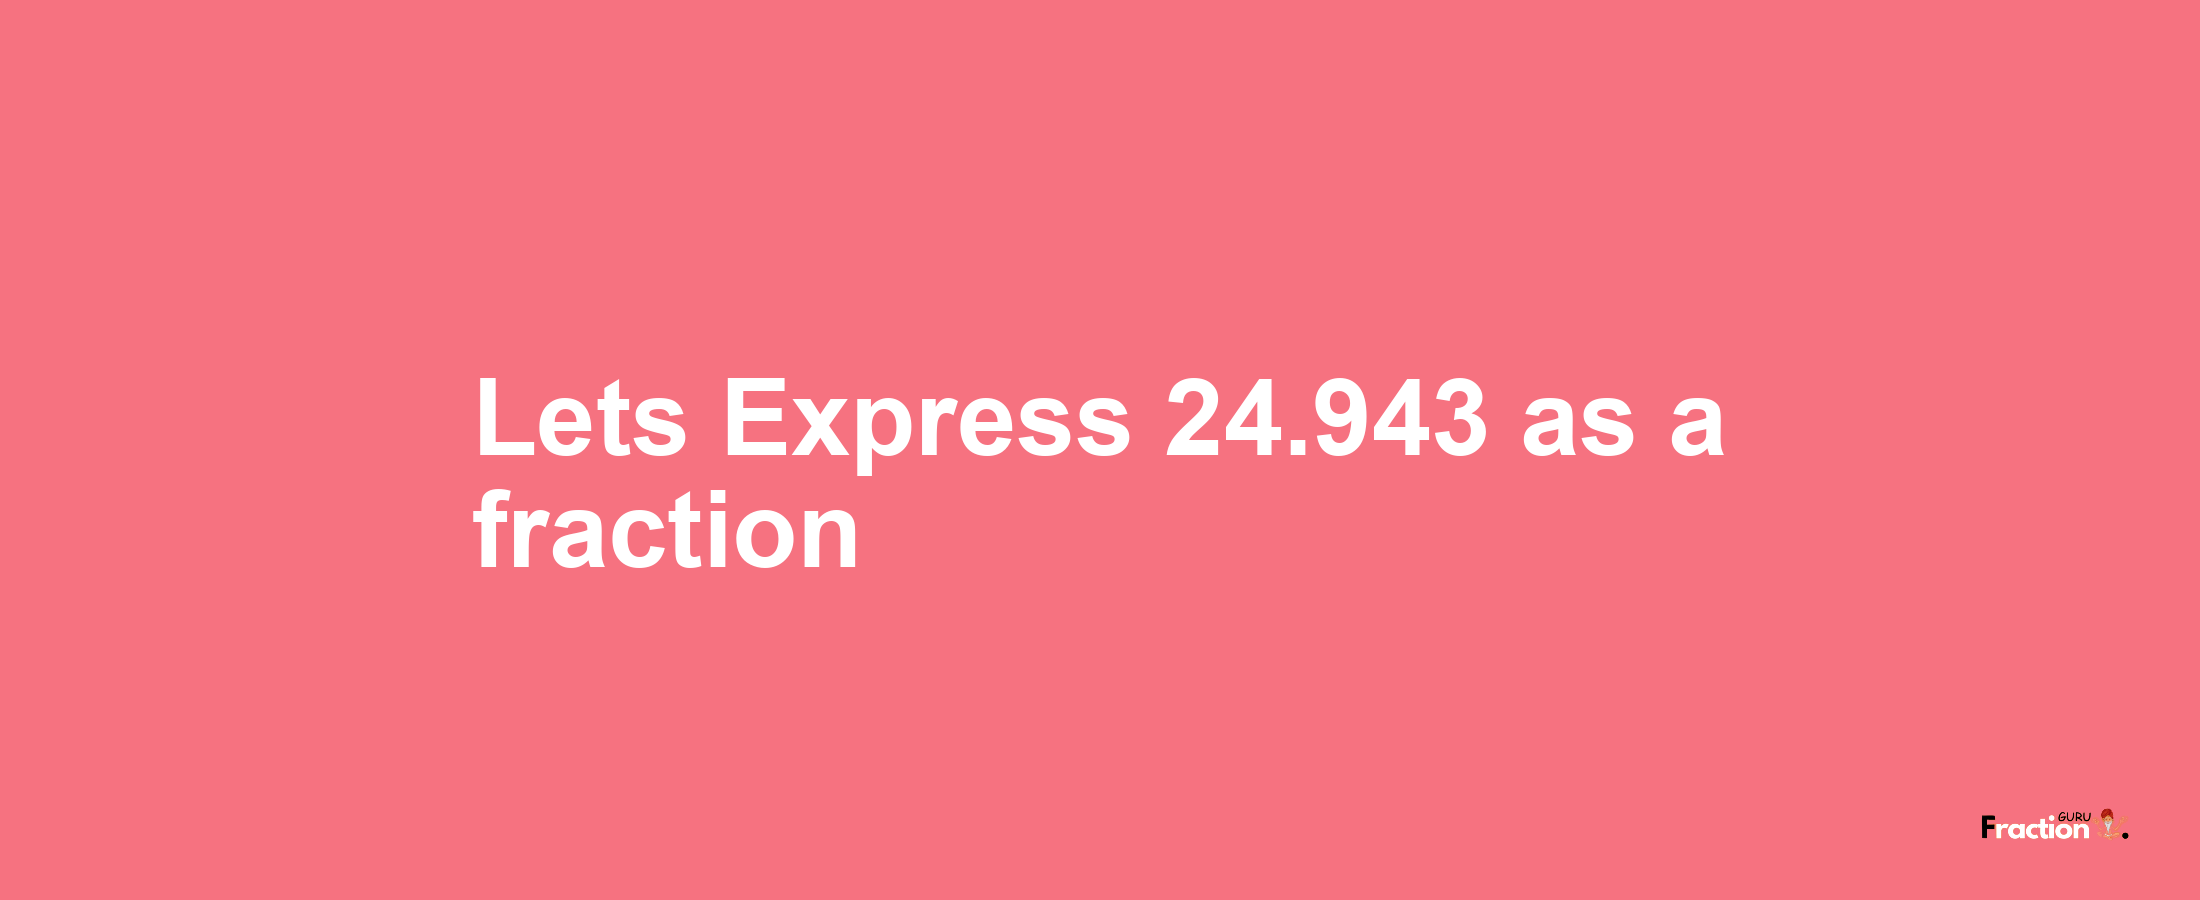 Lets Express 24.943 as afraction